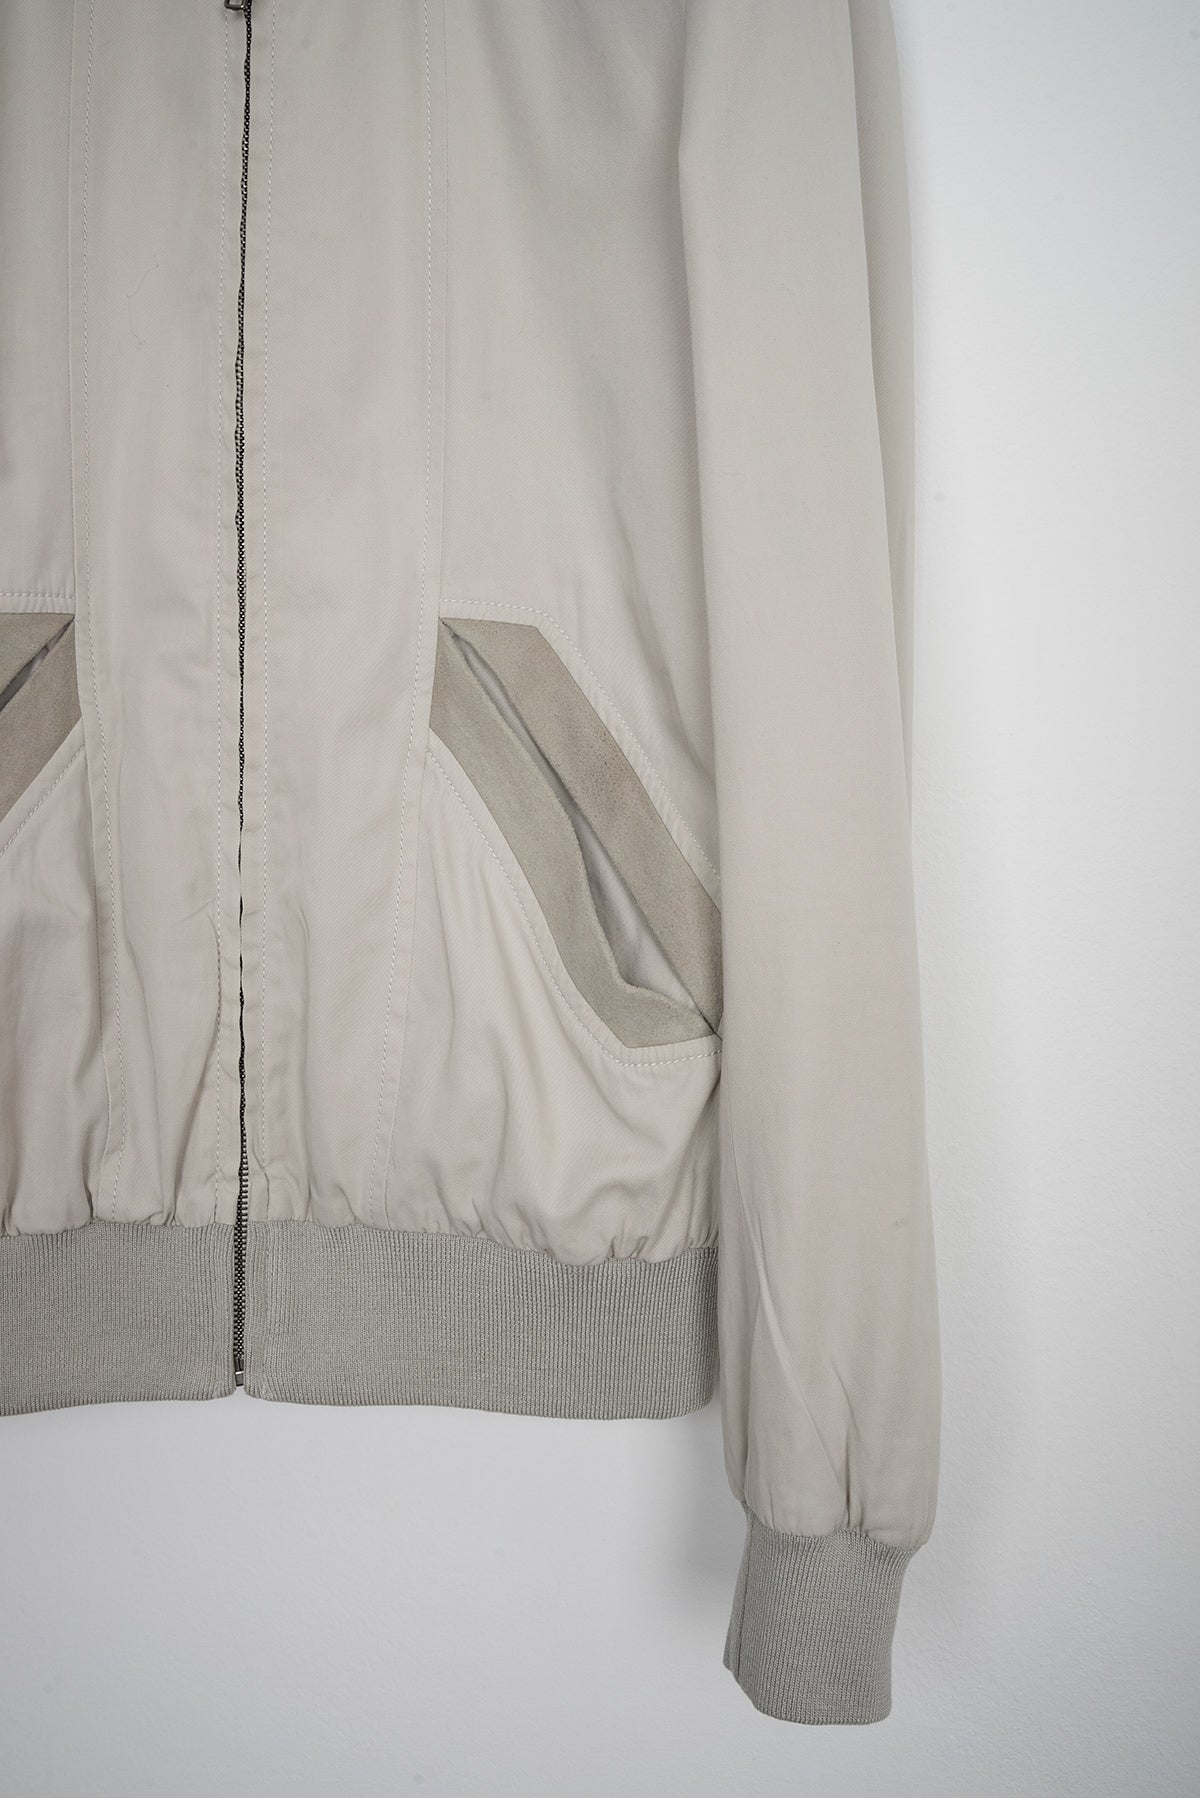 2008 S/S COTTON BOMBER JACKET WITH SUEDE INSERTS